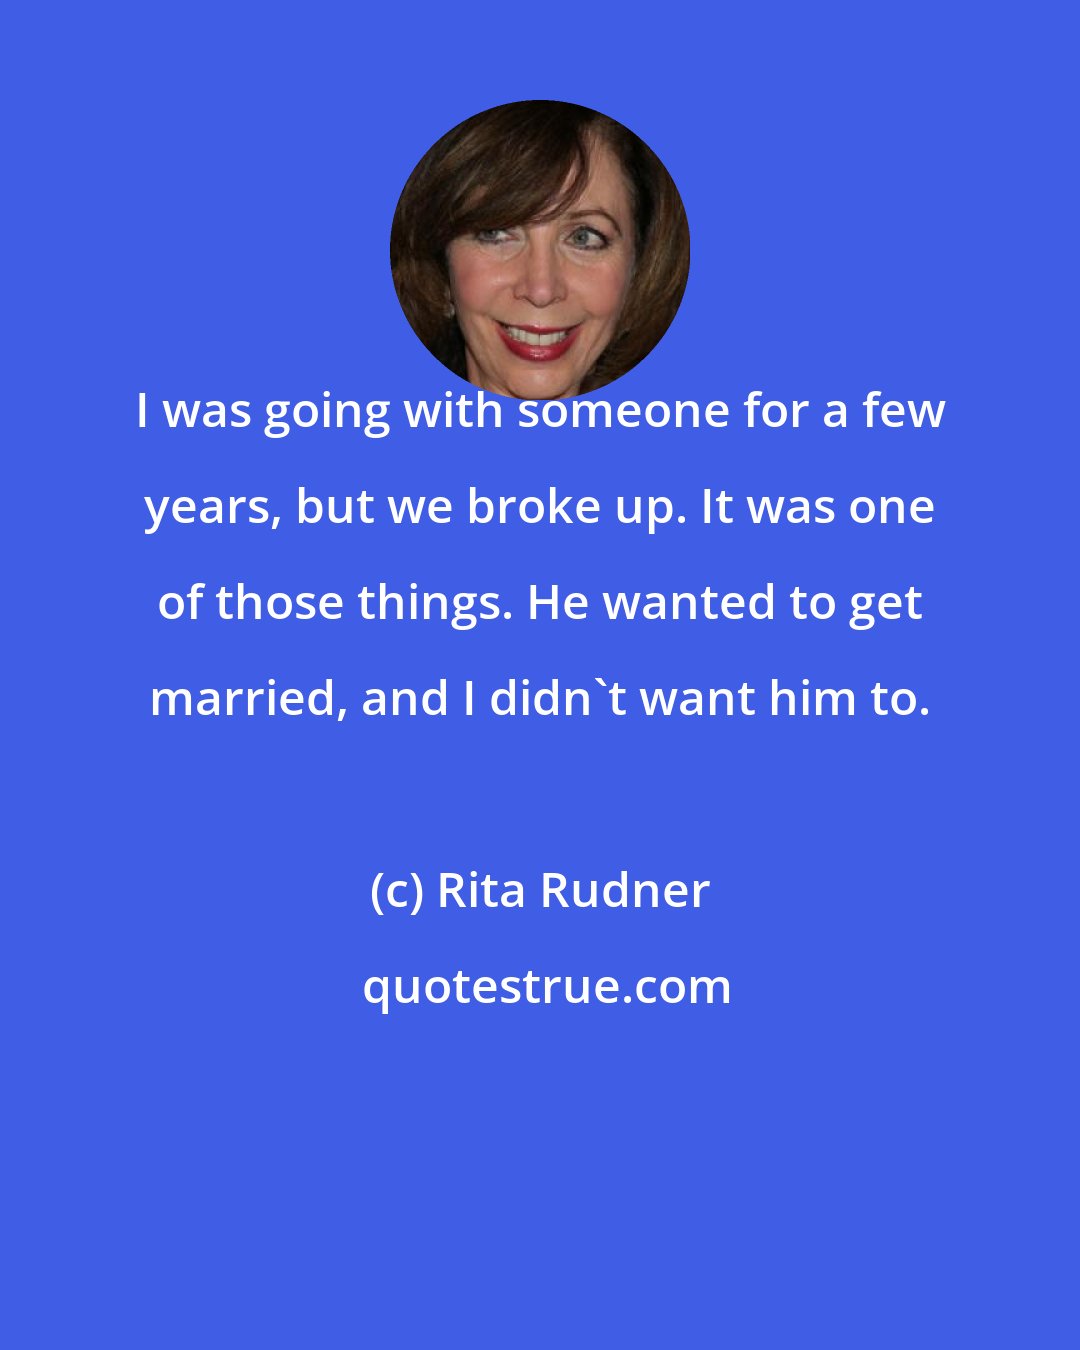 Rita Rudner: I was going with someone for a few years, but we broke up. It was one of those things. He wanted to get married, and I didn't want him to.